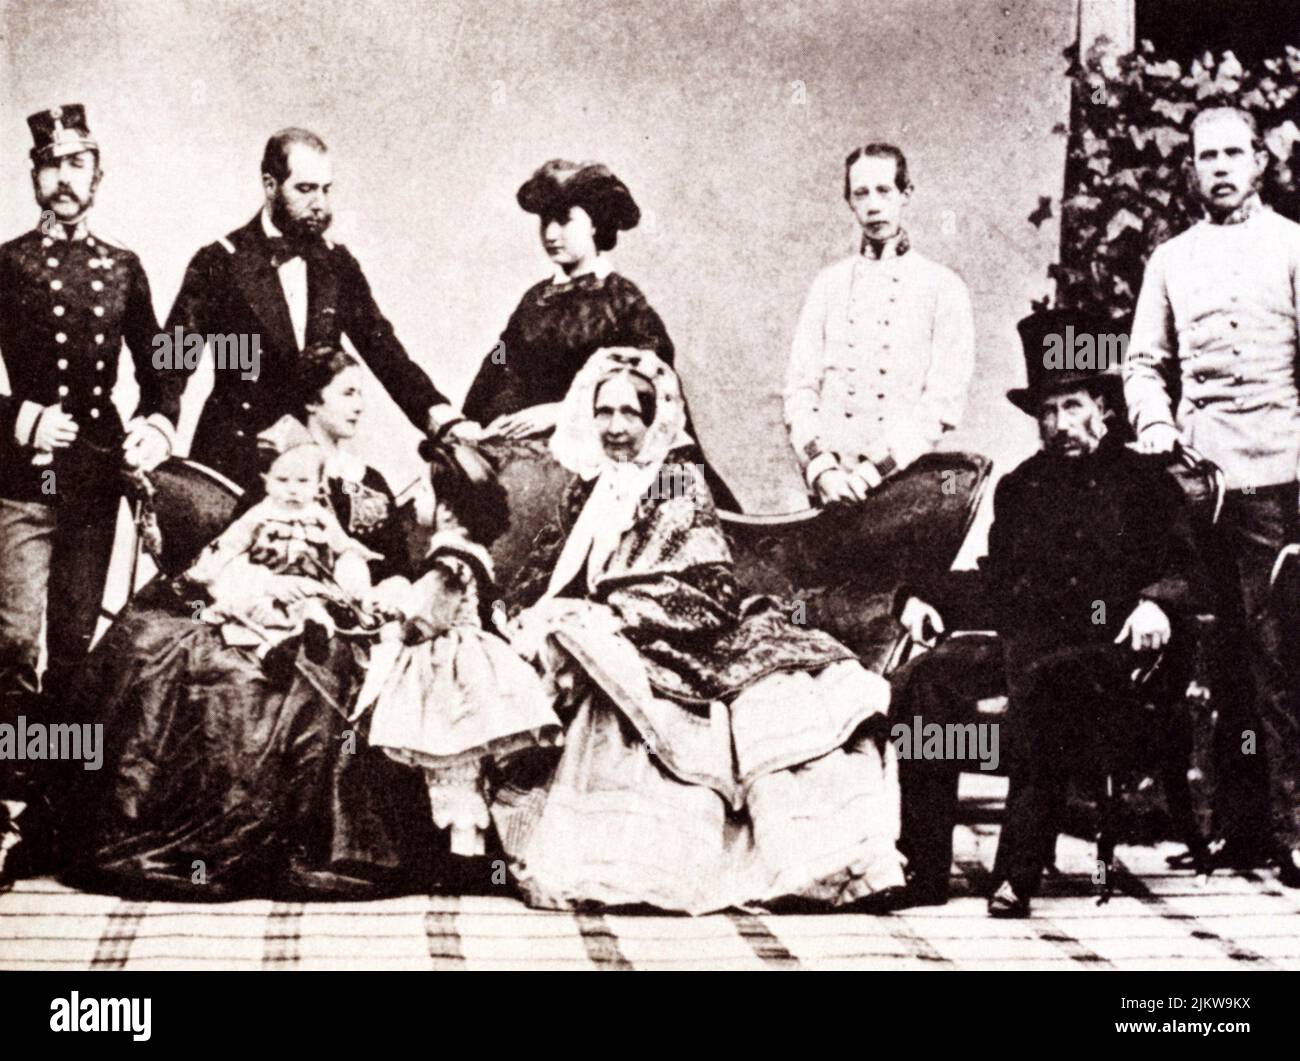 1859 , Wien , Austria   : The celebrated austrian  Empress Elisabeth of HABSBURG   ( SISSI von Wittelsbach  , 1837 - 1898 ) , daughter of Maximillian von Bayern, wife of  Kaiser Franz Josef ( 1830 - 1916 ) , Emperor of Austria , King of Hungary and Bohemia .Seated on couch with little  son RUDOLF ( 1858 - 1889 )  and  daughter  GISELA ( 1856 - 1932 ). Near her the Mother-in-law and aunt Archduchess SOPHIE of Bavaria ( 1805 - 1872 ) with husband FRANZ KARL ( 1802 - 1878 ) of Habsburg . Standing (from left ) the 3 brothers : The Kaiser FRANZ JOSEF , Ferdinand MAXIMILIAN (future 1864  Emperor of Stock Photo